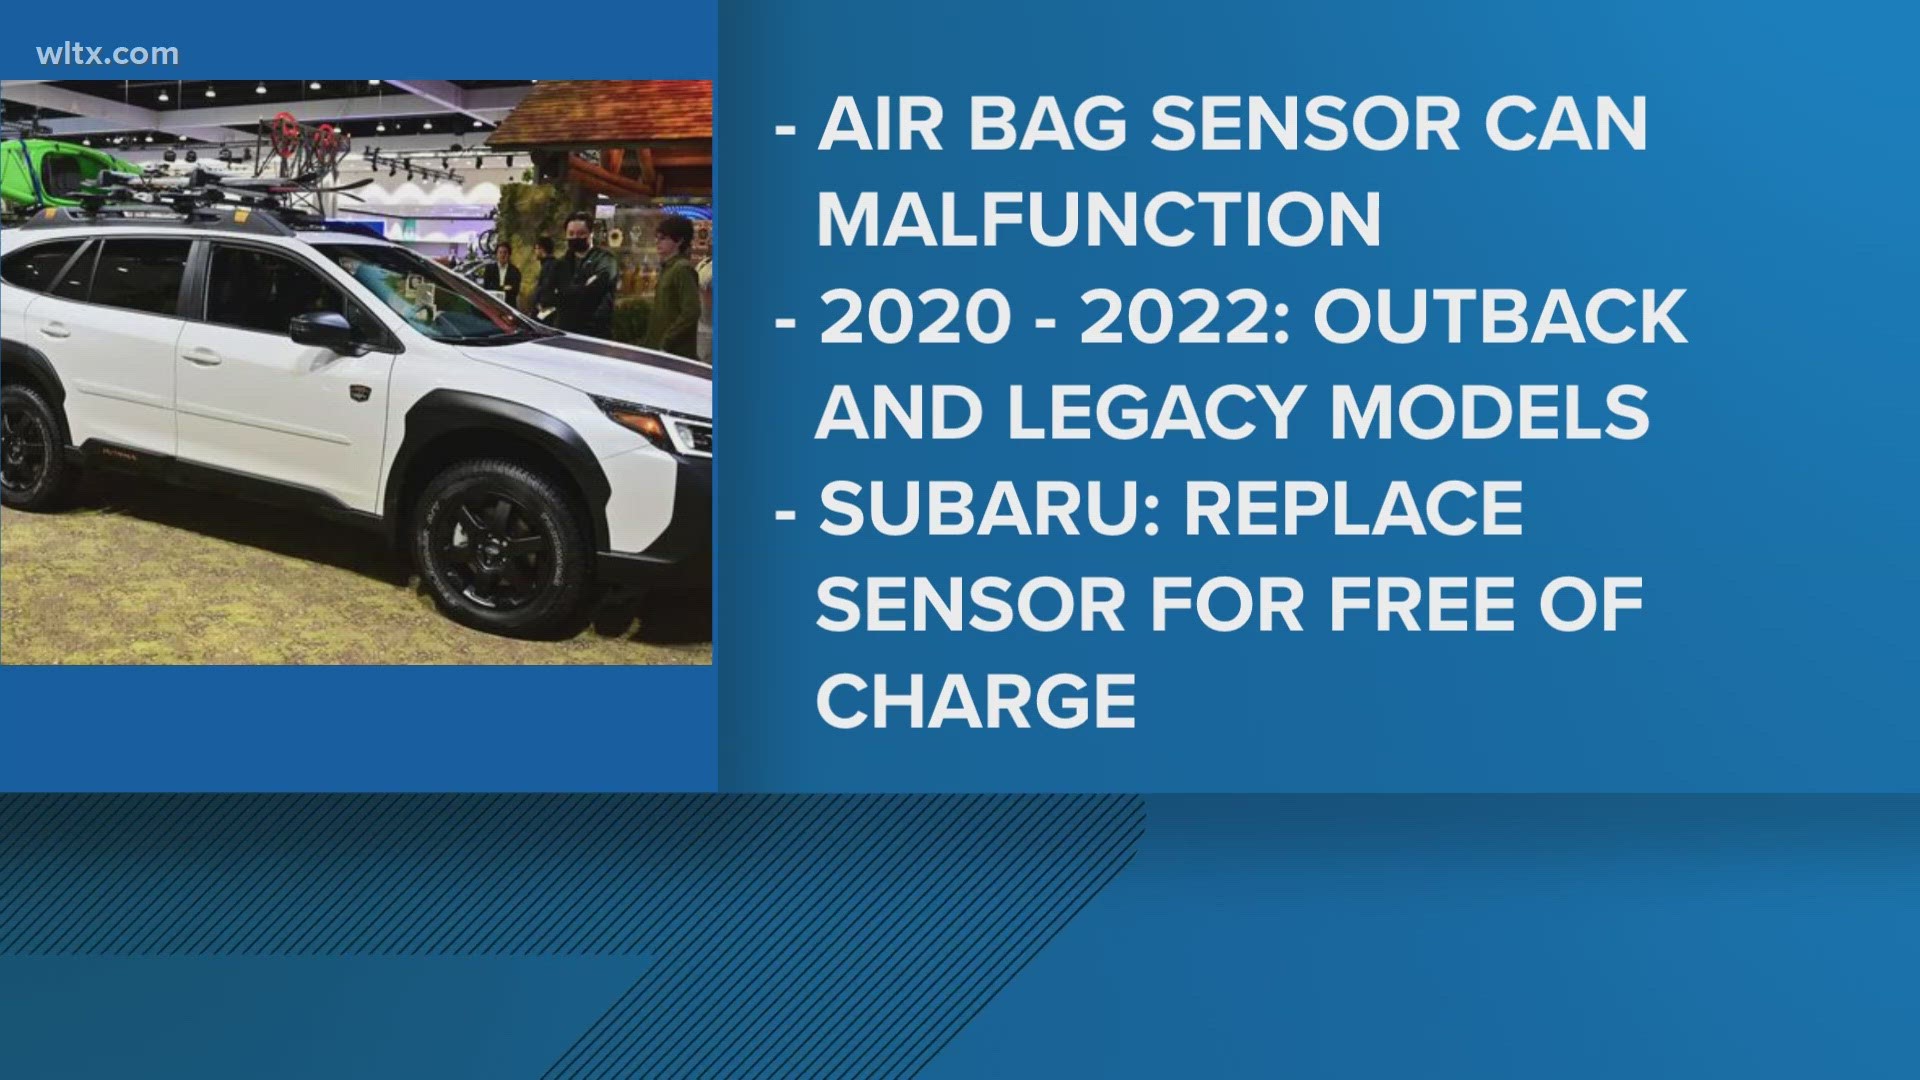 The company says a problem is with the front passenger air bags.